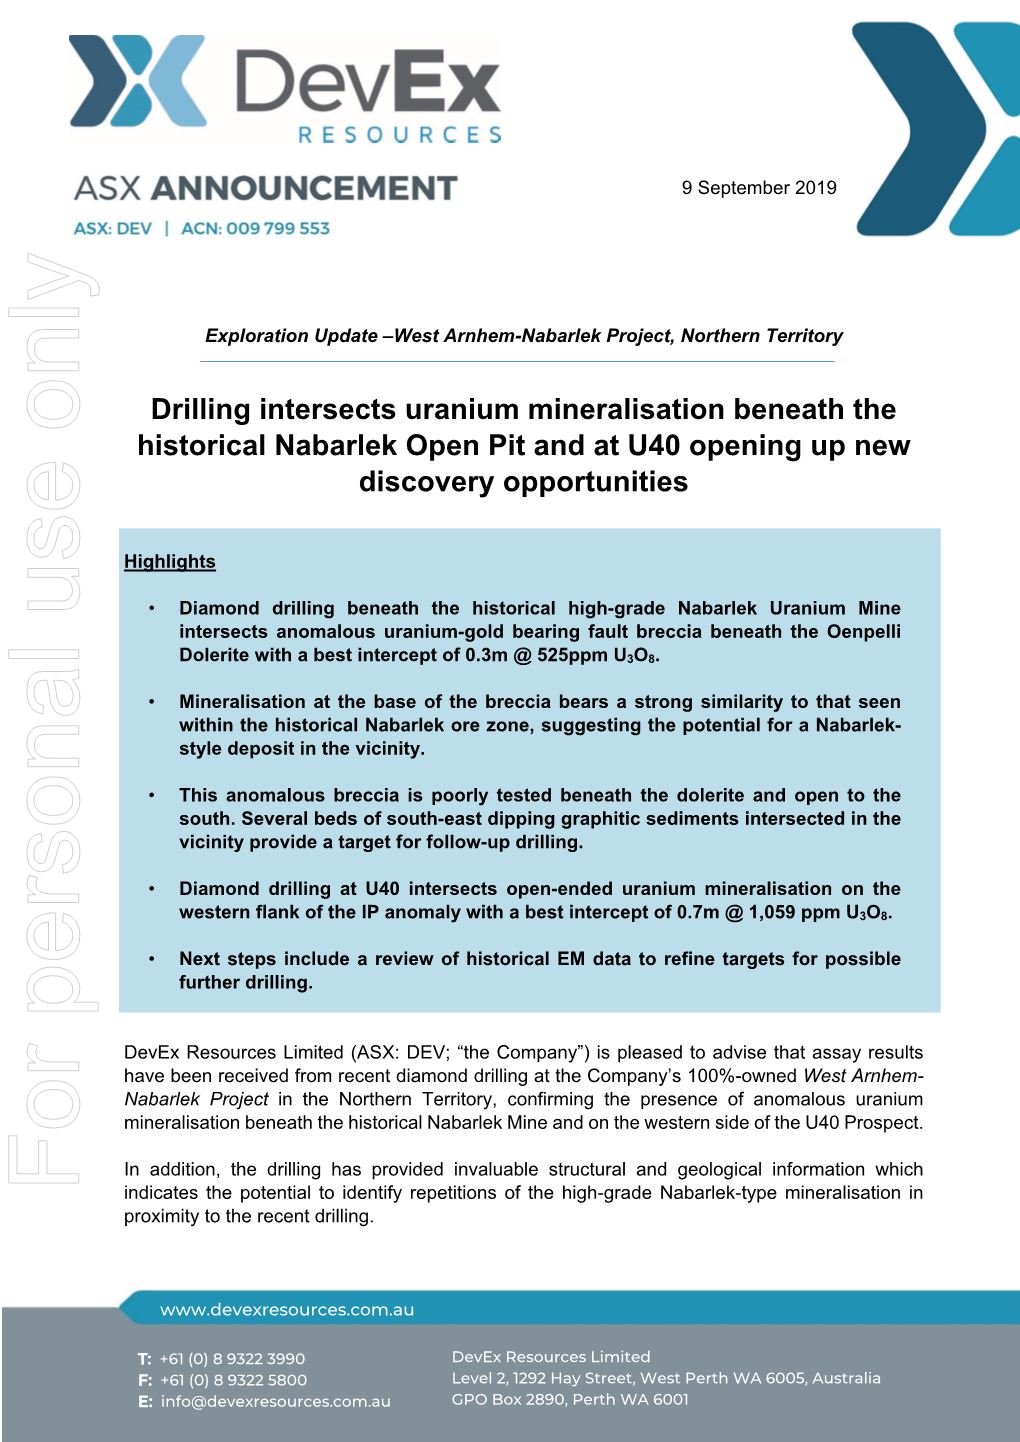 Drilling Intersects Uranium Mineralisation Beneath the Historical Nabarlek Open Pit and at U40 Opening up New Discovery Opportunities